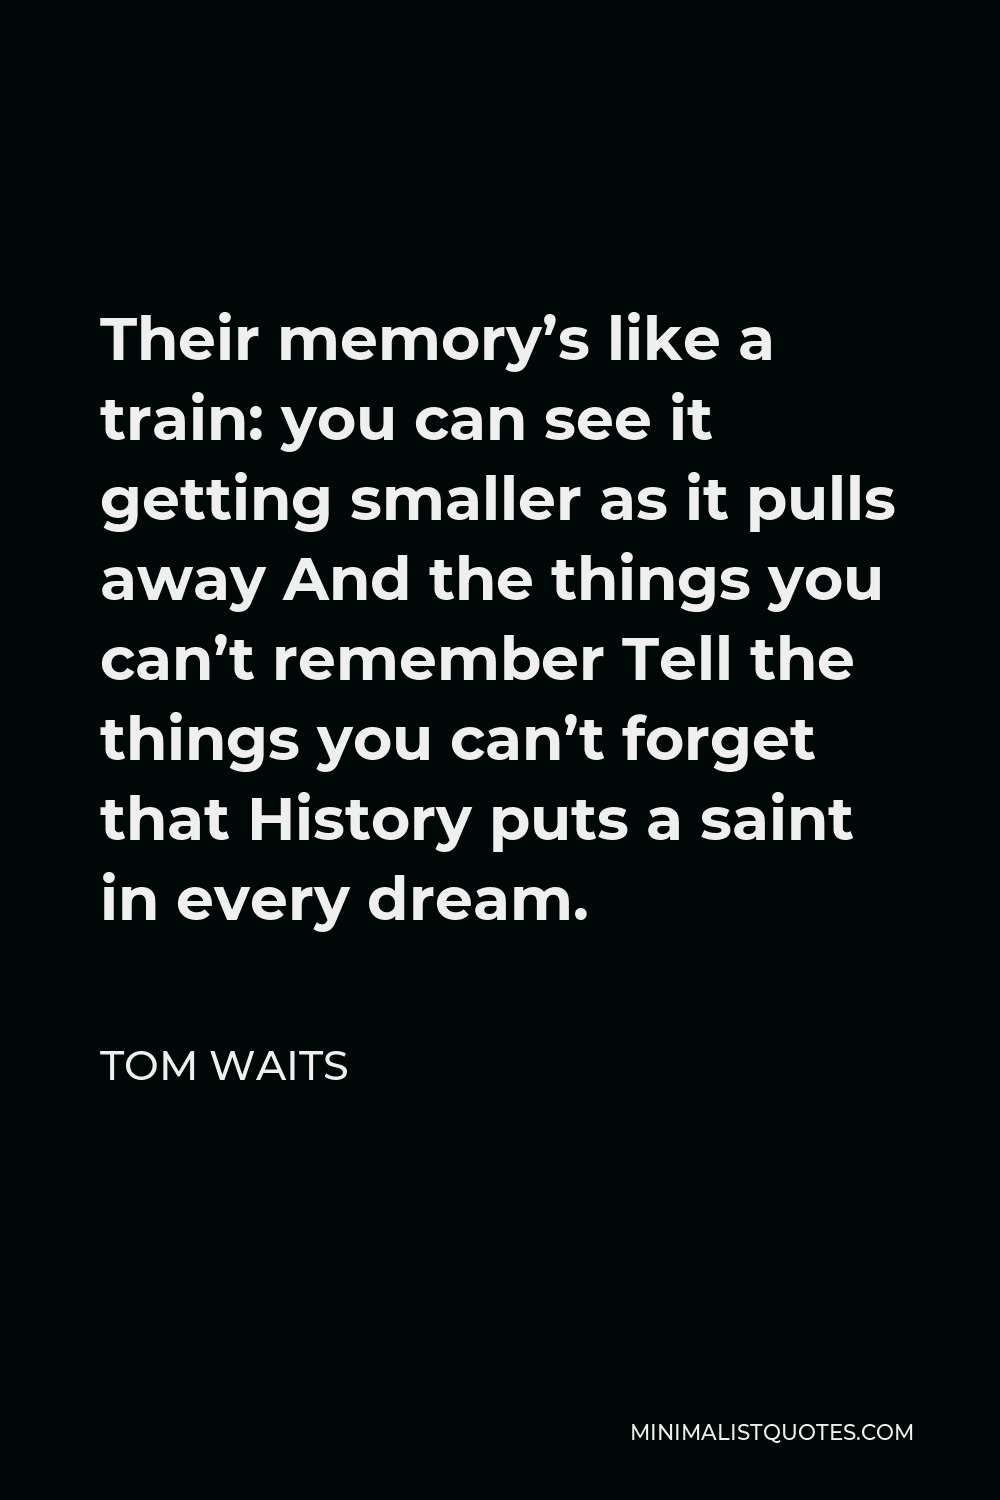 Tom Waits Quote - Their memory’s like a train: you can see it getting smaller as it pulls away And the things you can’t remember Tell the things you can’t forget that History puts a saint in every dream.